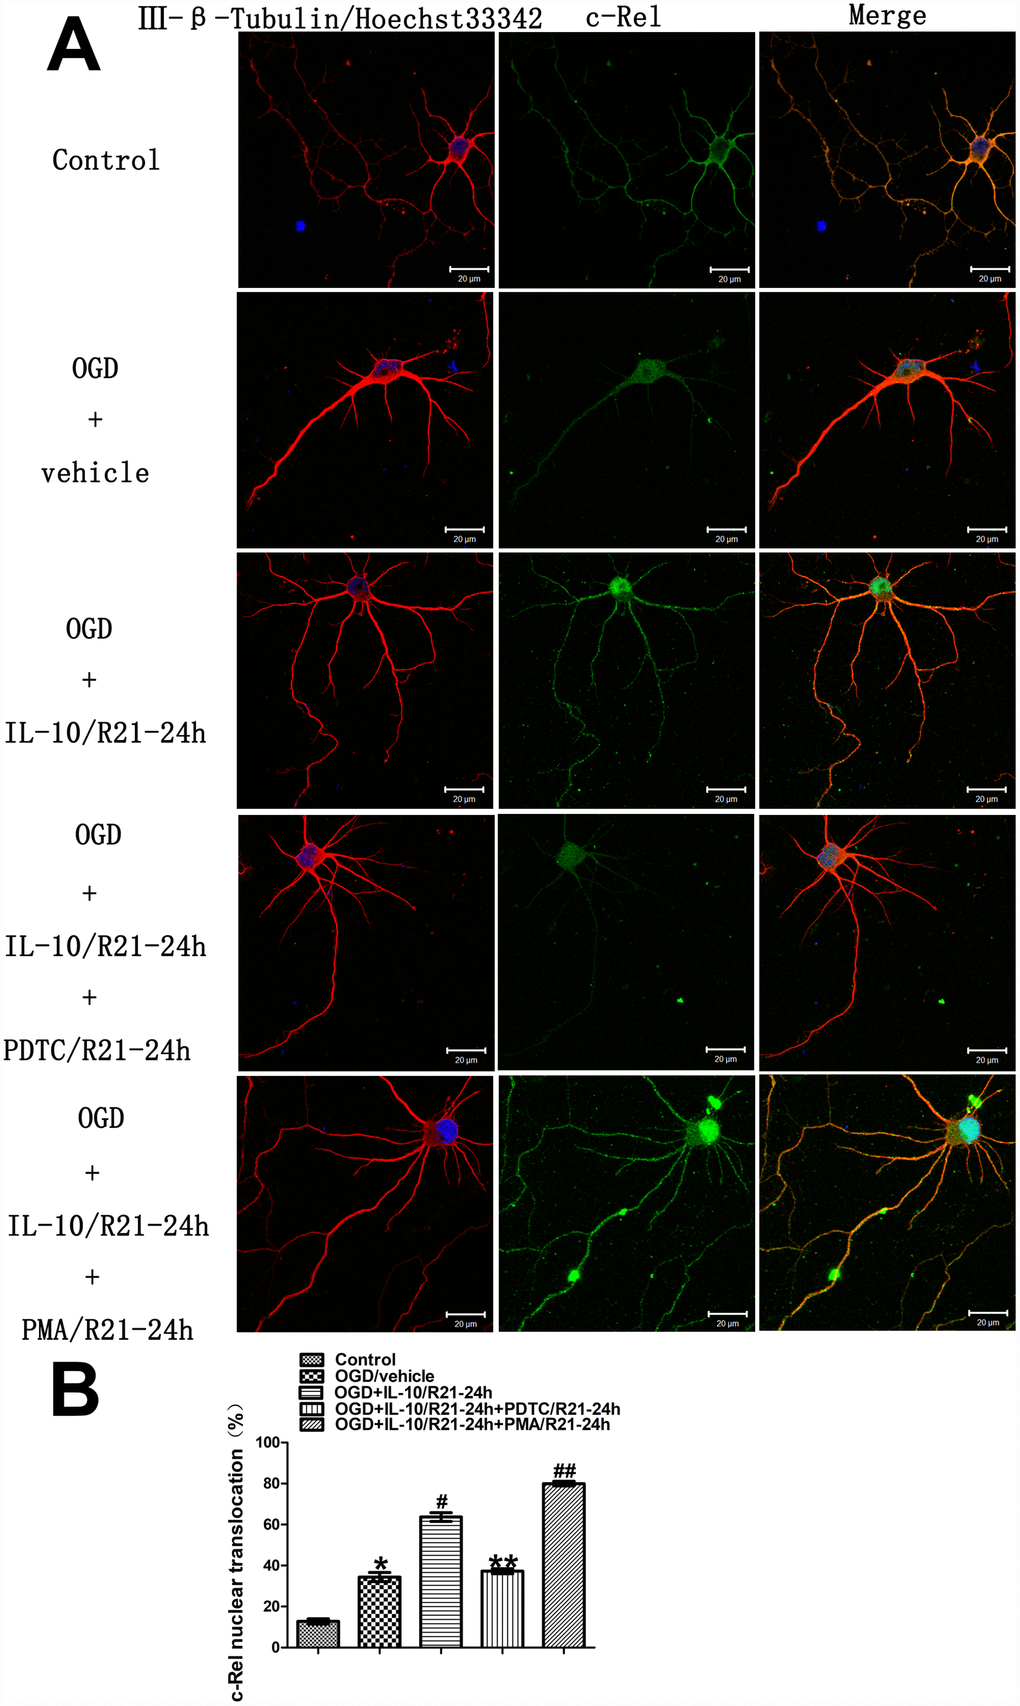 Localization and nuclear translocation of c-Rel at a late stage after OGD injury. (A) Representative images of each group. The left column displays neuronal marker class Ⅲ-β-Tubulin (red) and nucleus (blue). The middle column shows expression of c-Rel (green). The right column indicates the co-localization of class Ⅲ-β-Tubulin, nucleus and c-Rel. Scale bar is 20 μm. (B) Quantification of c-Rel nuclear translocation. *p#pp##pp